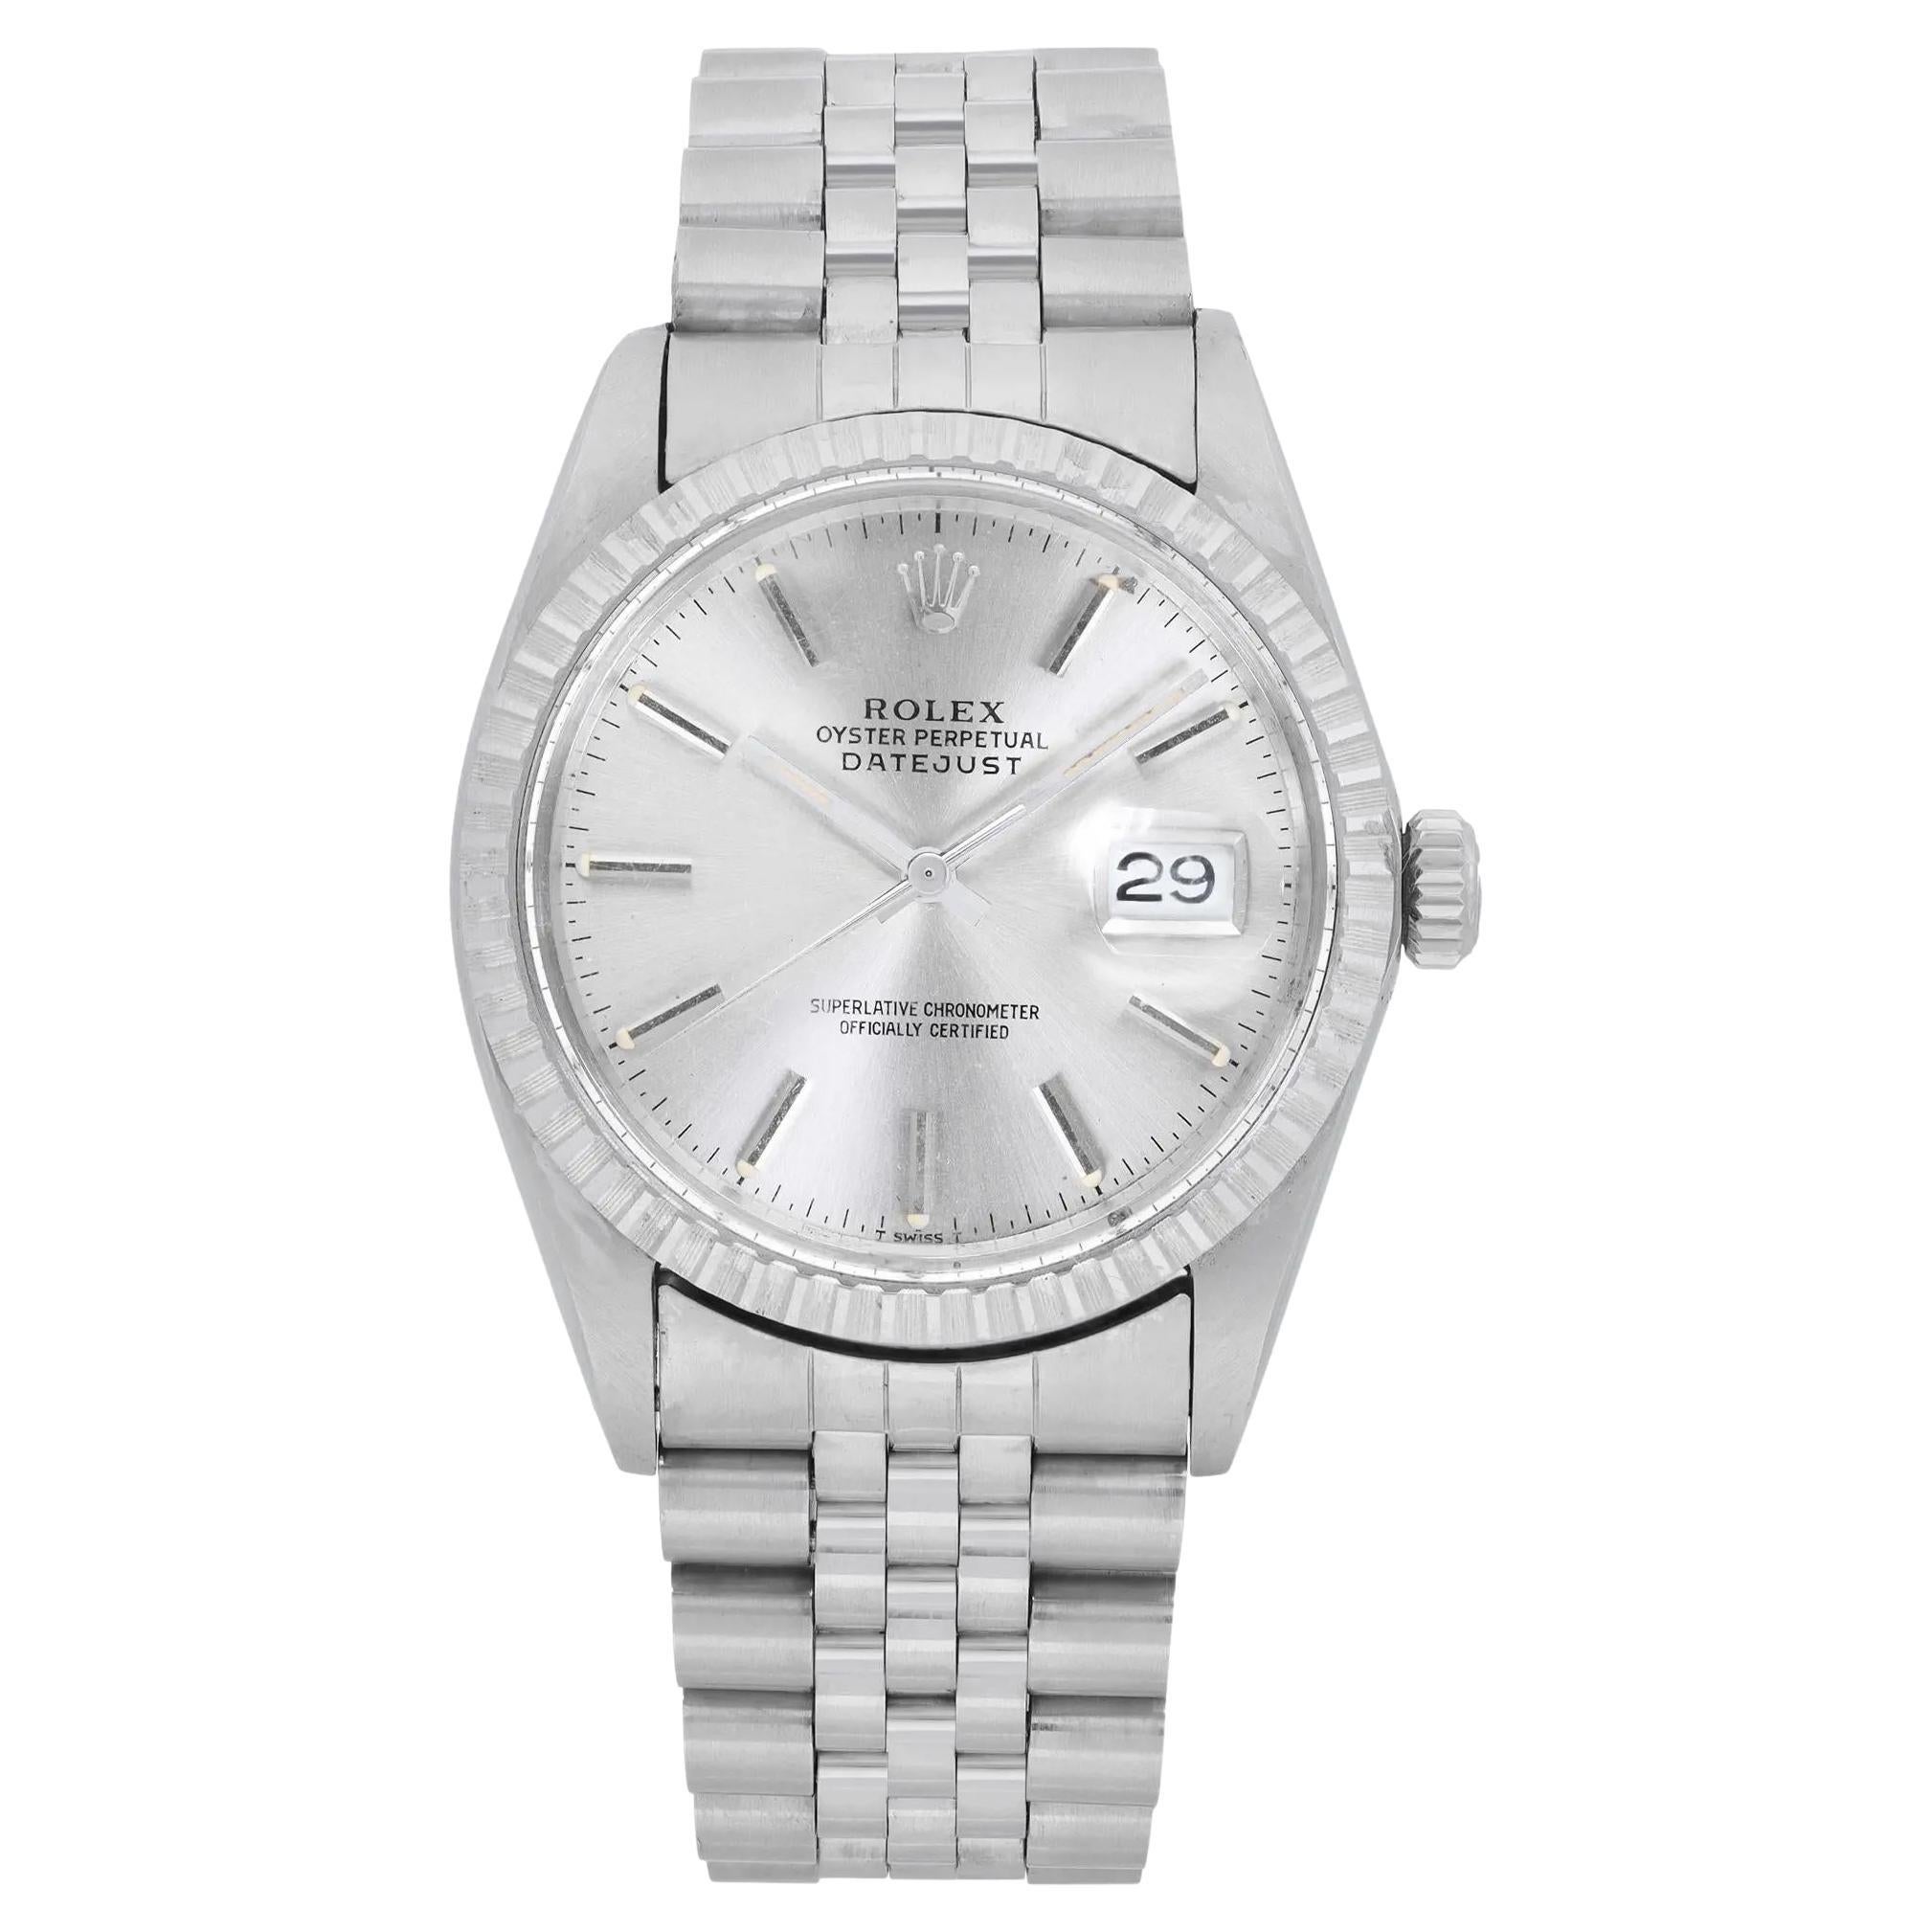 Rolex Datejust Stainless Steel Silver Dial Automatic Mens Watch 16030